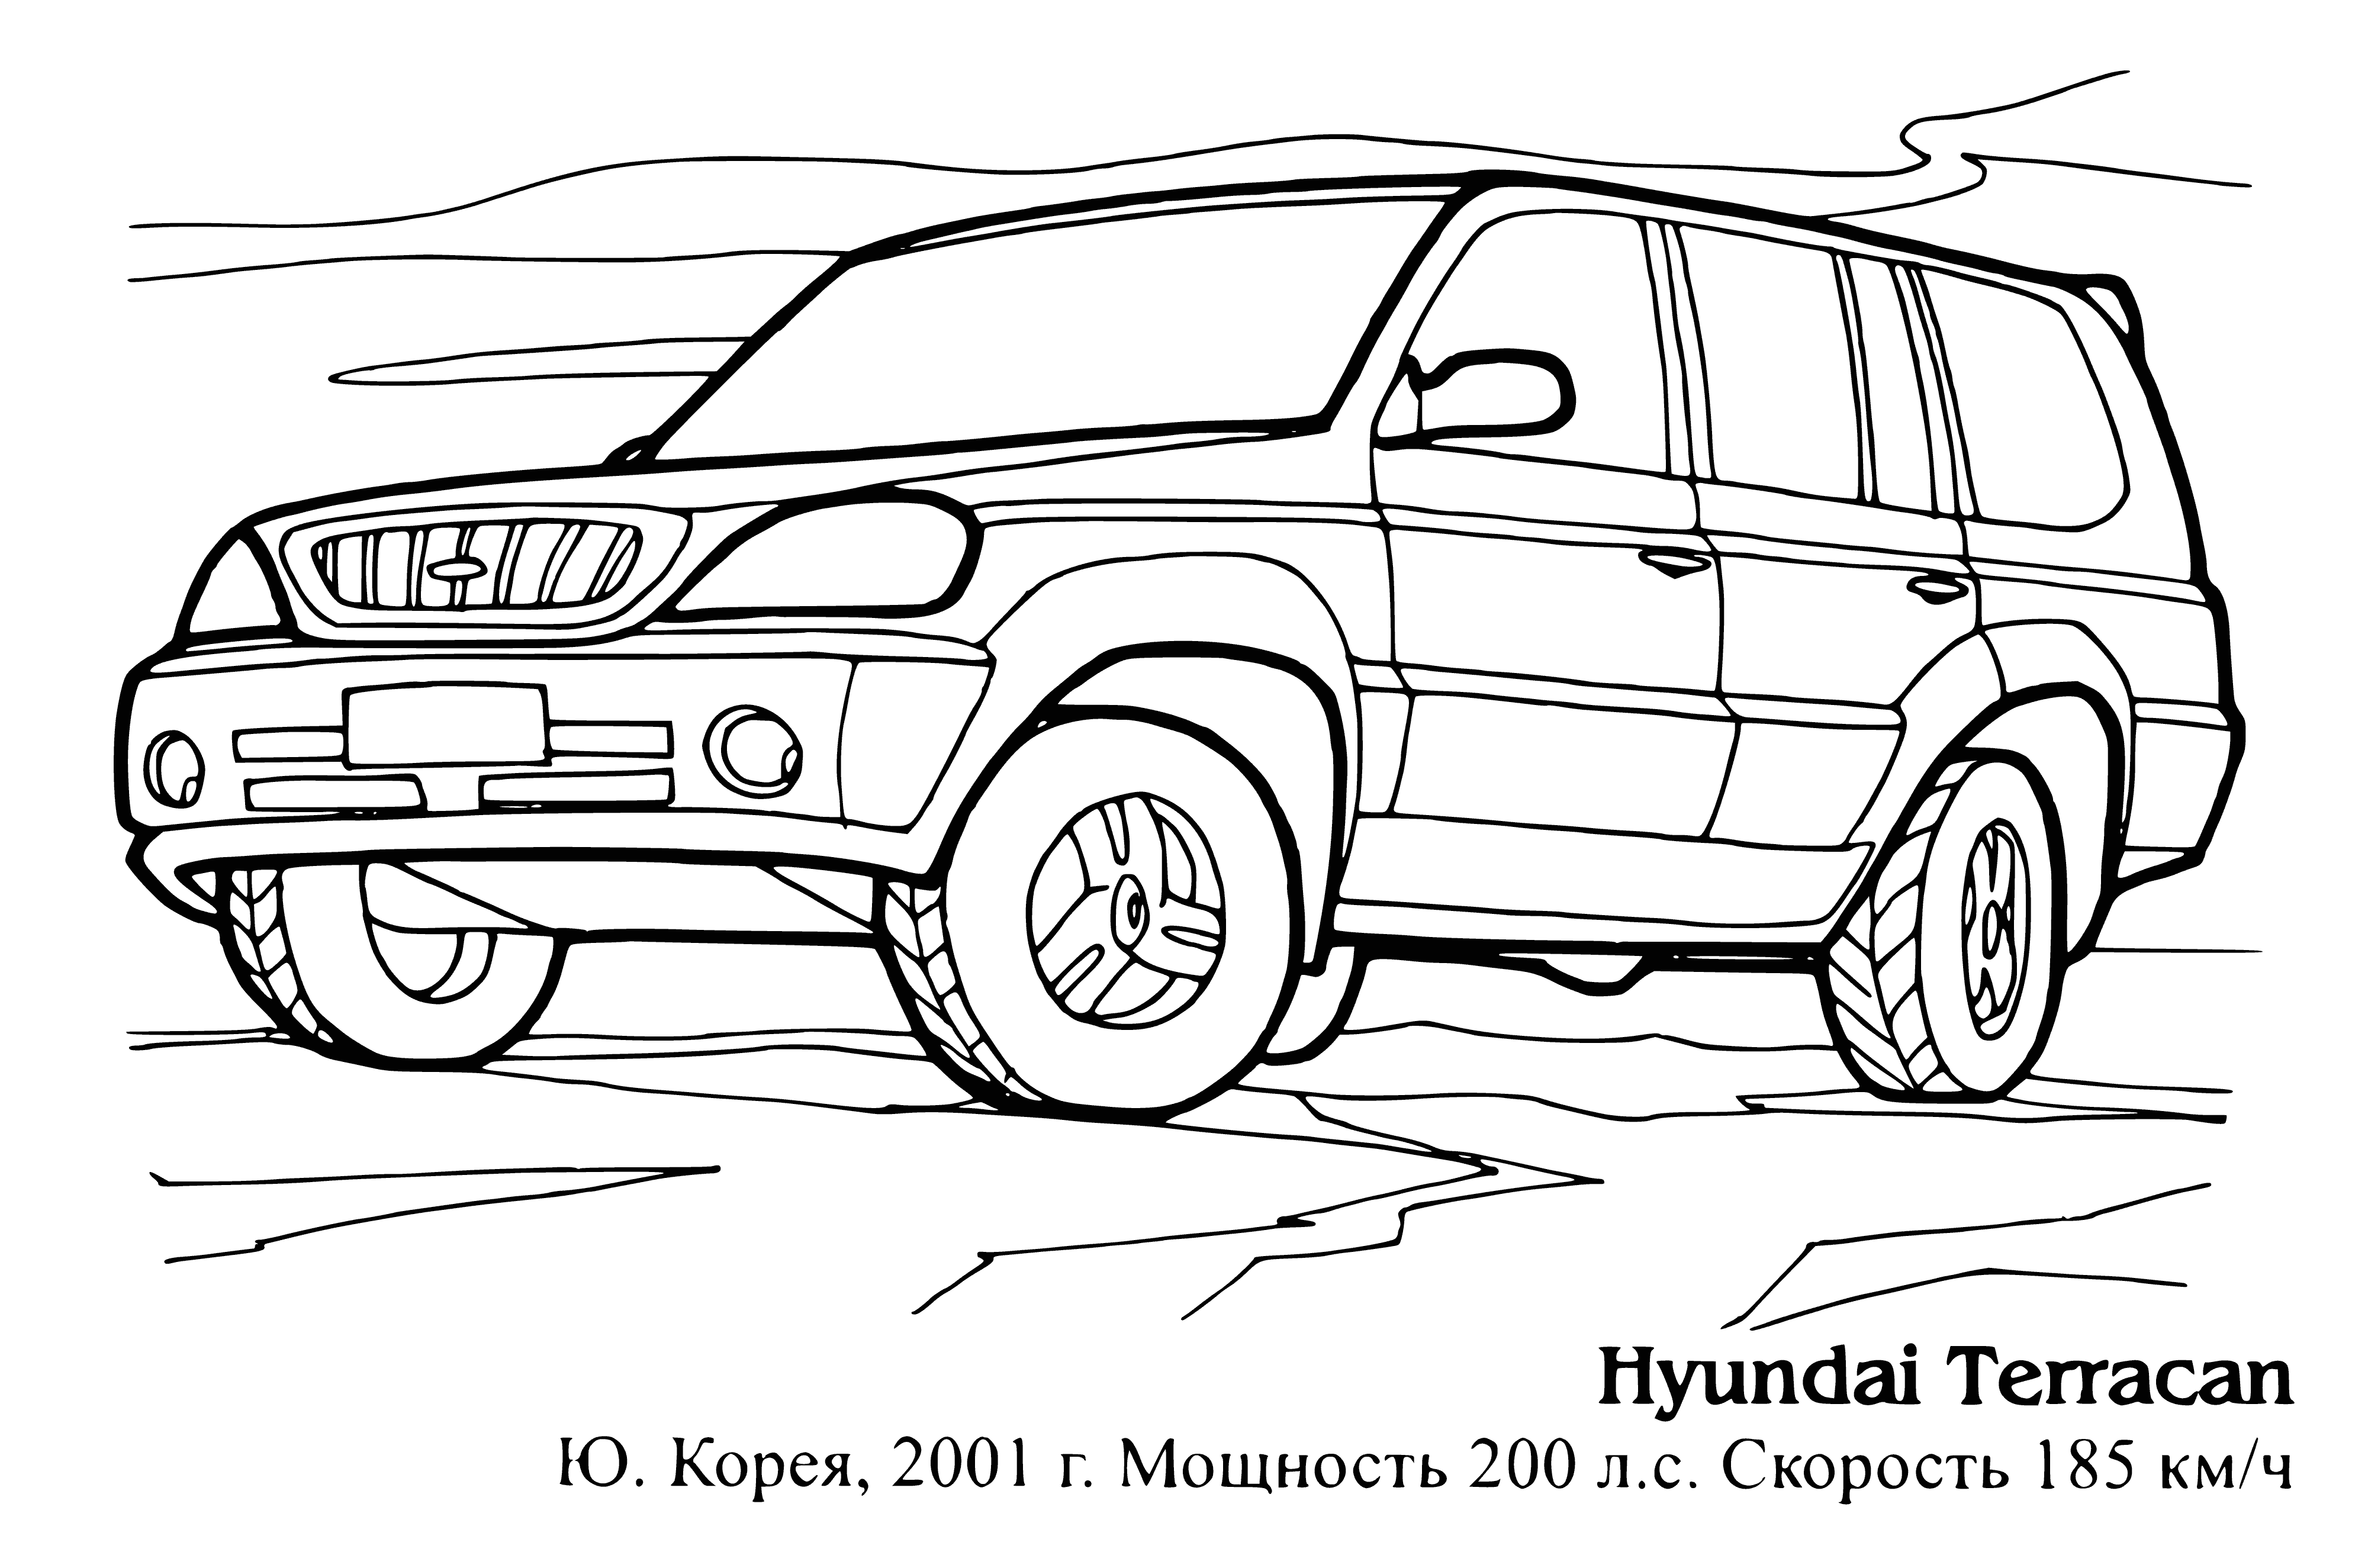 coloring page: Sun shines on a blue Hyundai Terracan, parked on a hill, surrounded by trees & boasting 4 doors & a rear hatch.